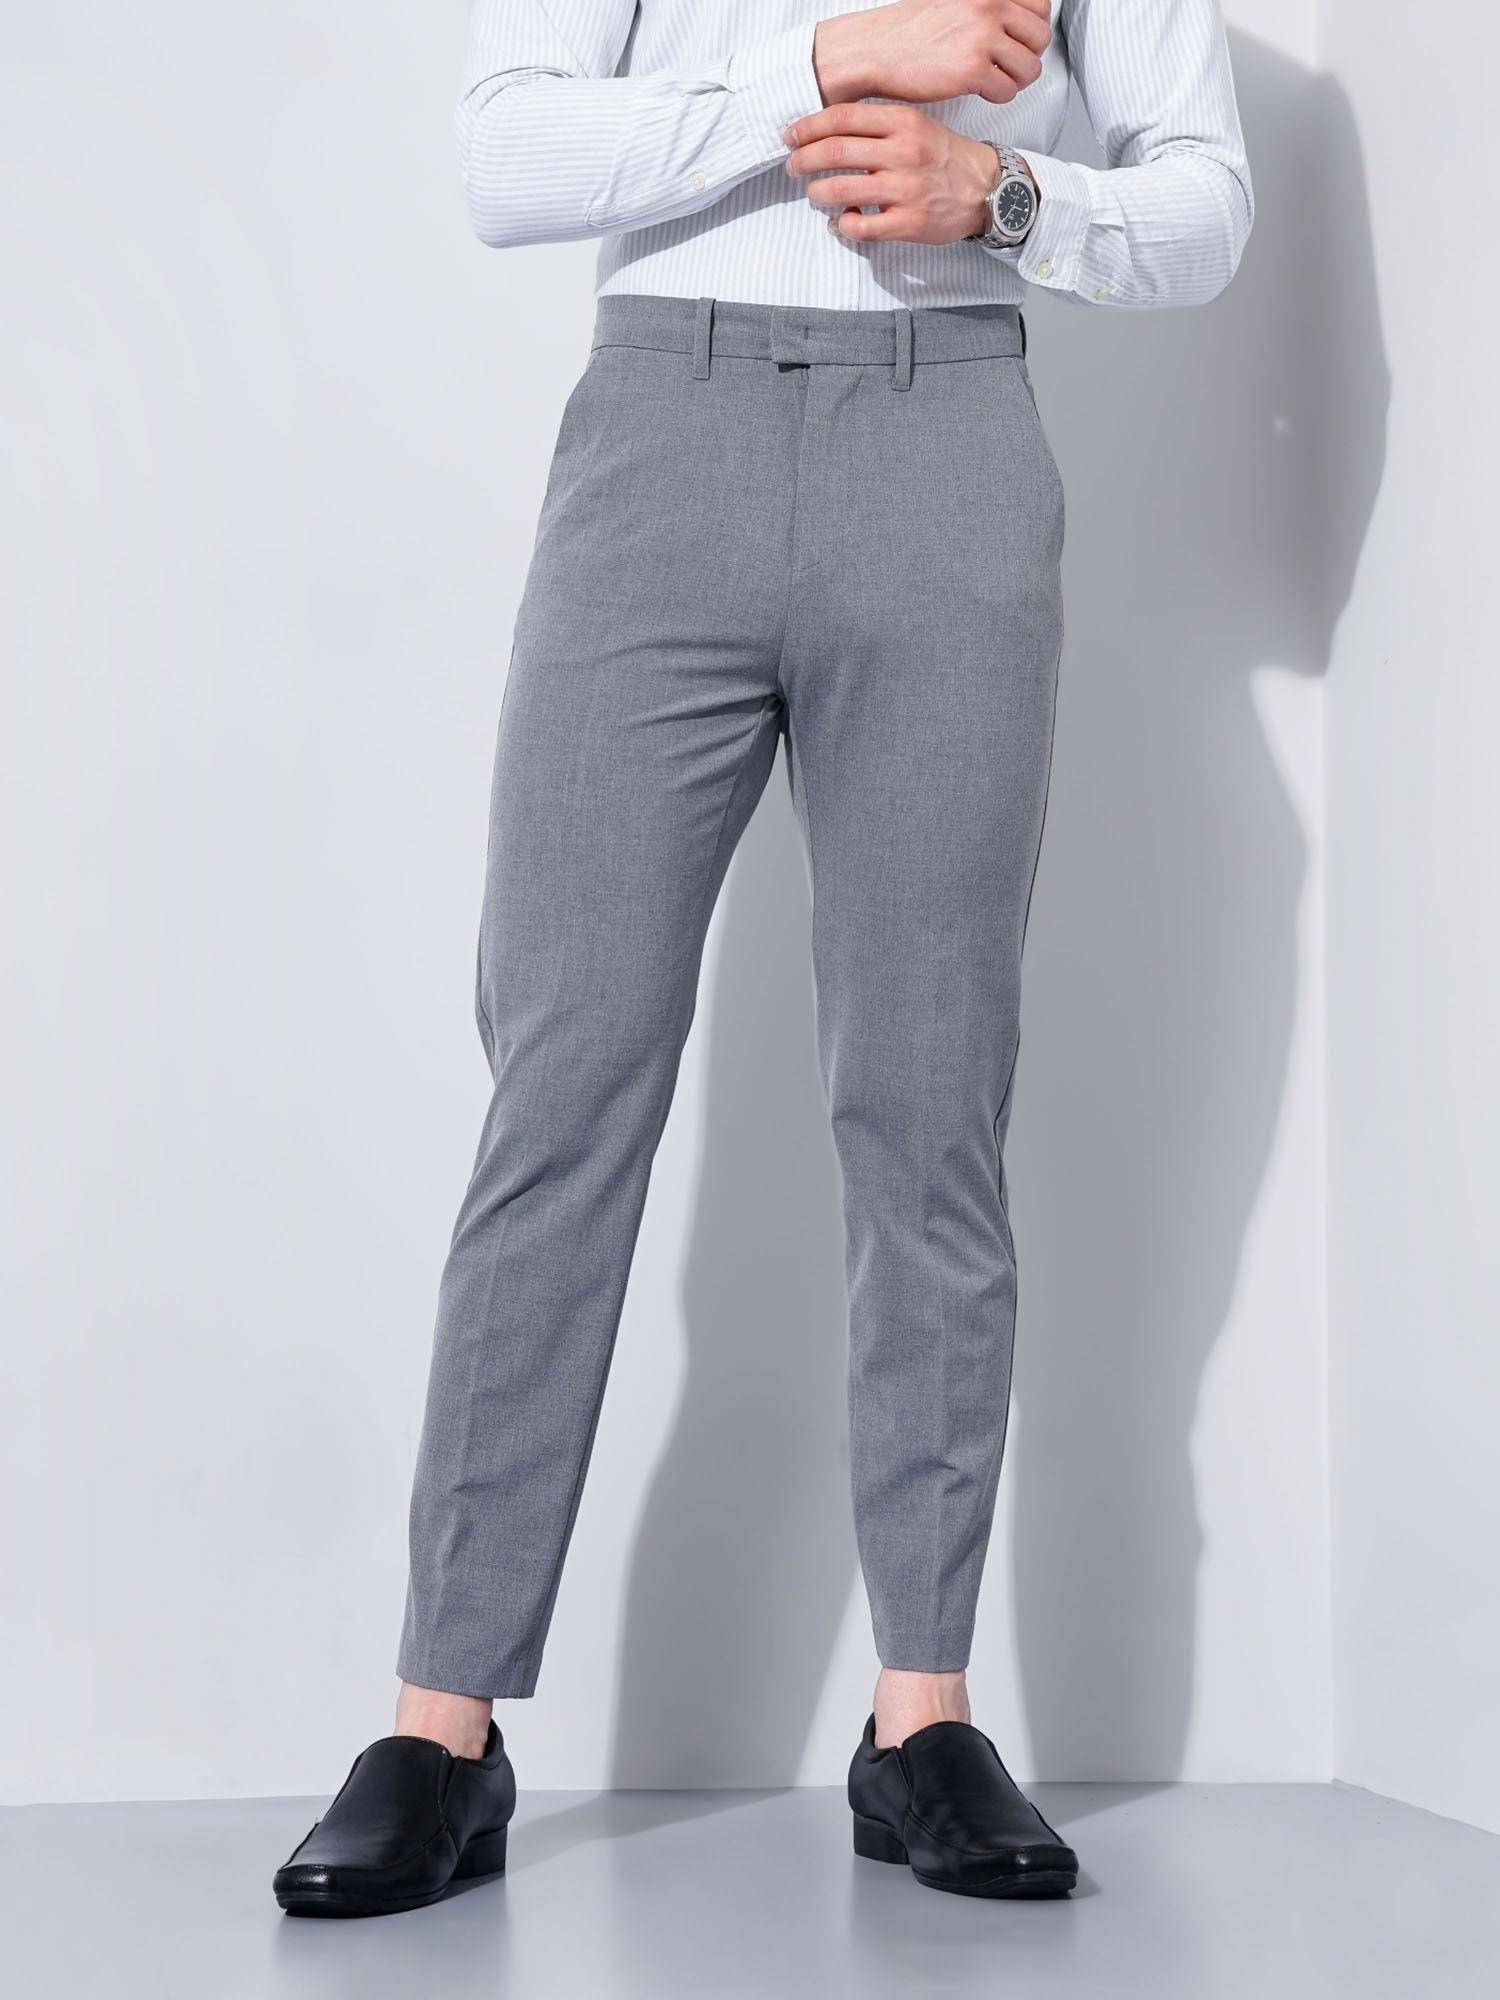 Mens Solid Formal Trousers